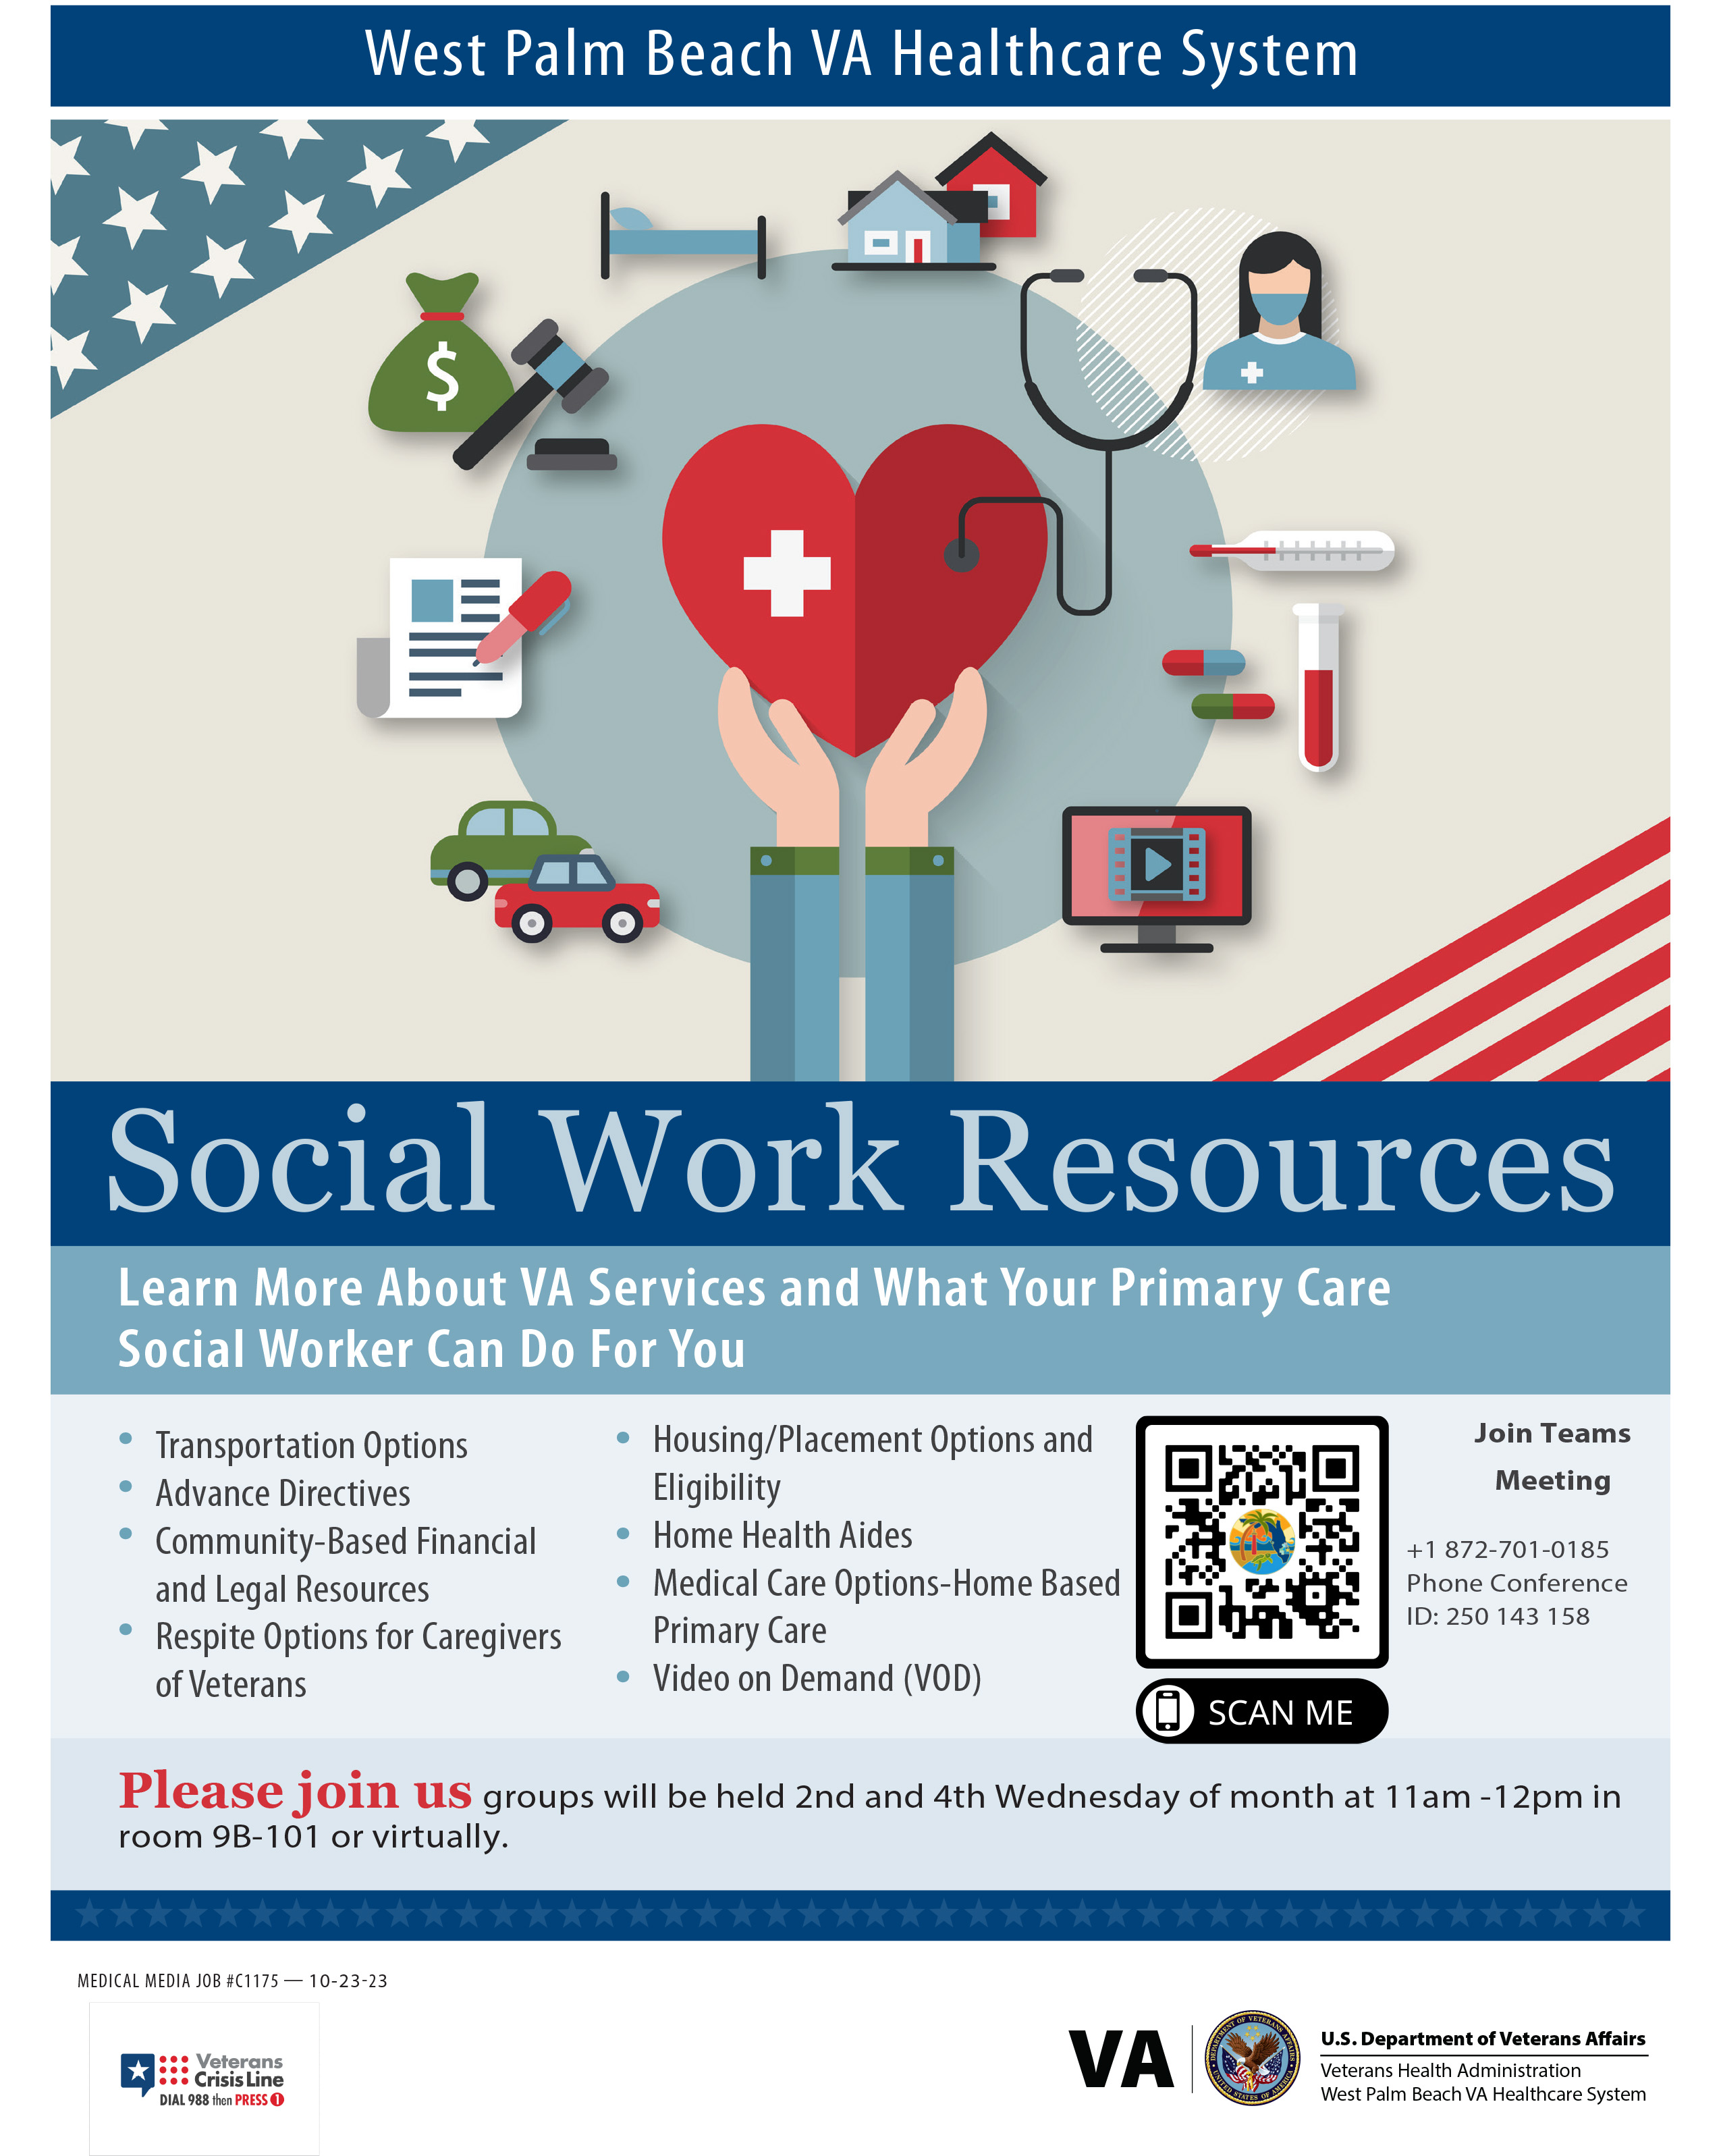 Join a bi-monthly virtual meeting to learn about social work resources for veterans and dependants.